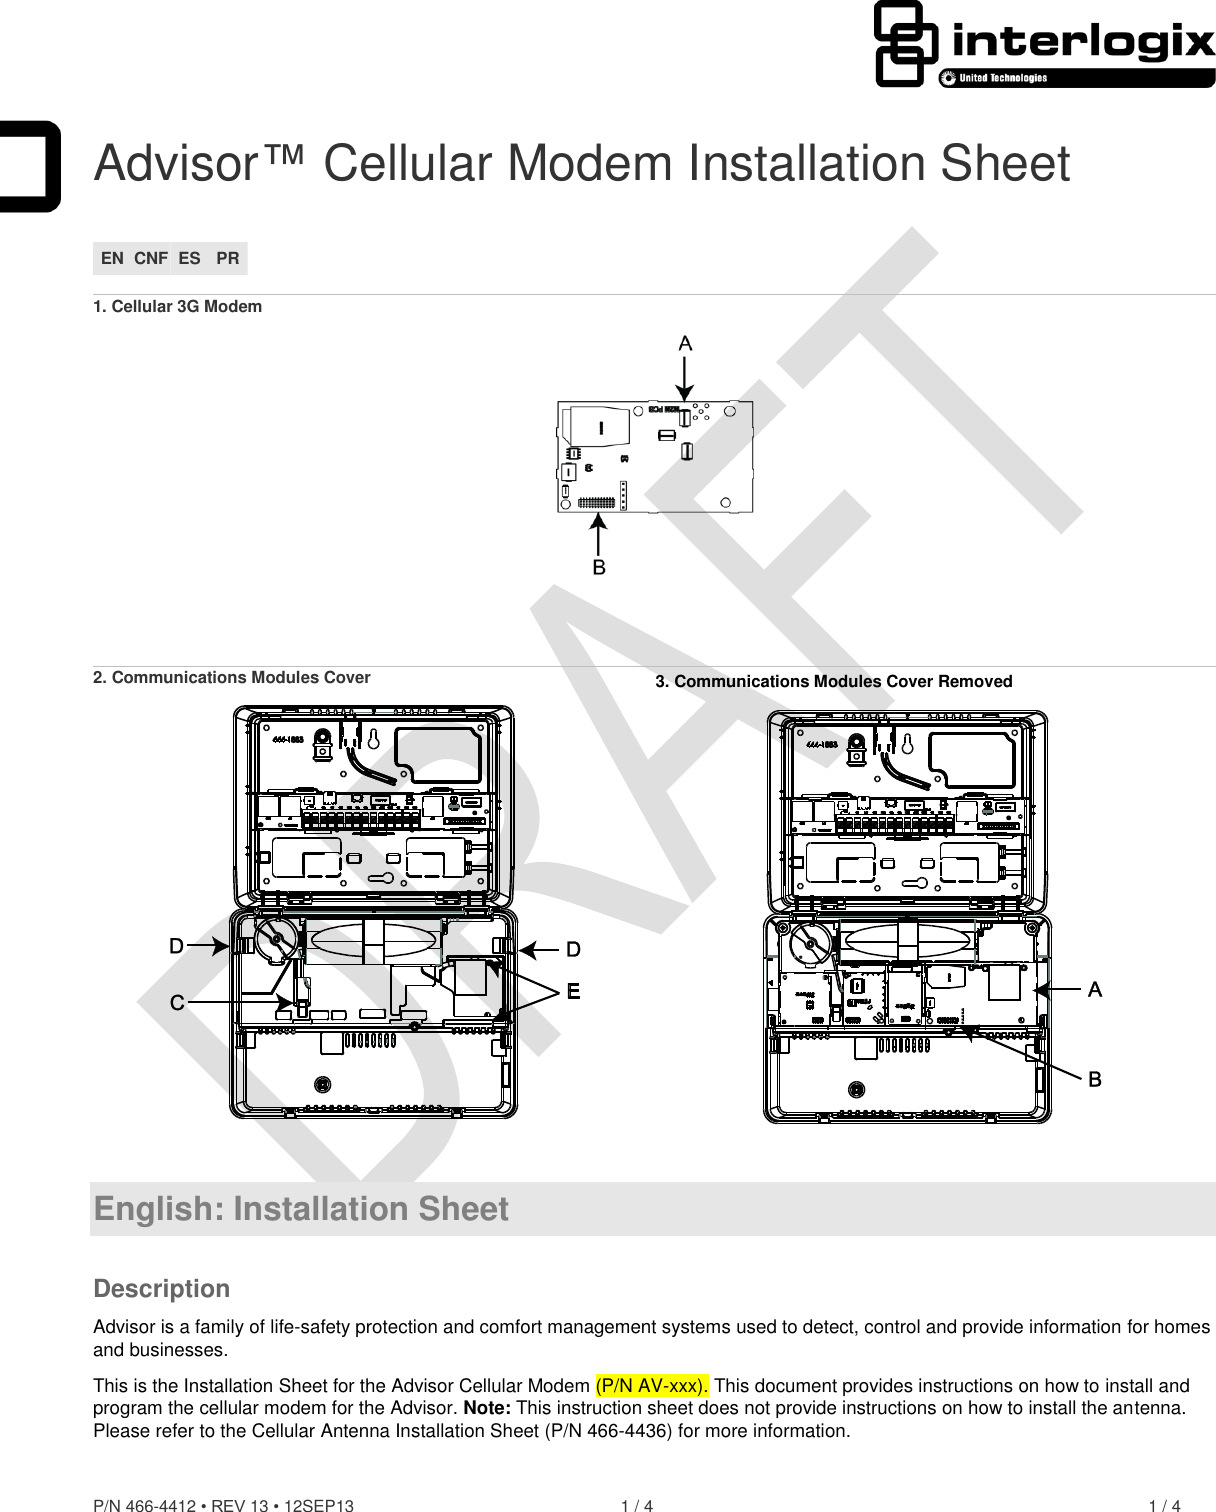  P/N 466-4412 • REV 13 • 12SEP13  1 / 4  1 / 4  Advisor™ Cellular Modem Installation Sheet EN CNF ES PR  1. Cellular 3G Modem    2. Communications Modules Cover  3. Communications Modules Cover Removed    English: Installation Sheet Description Advisor is a family of life-safety protection and comfort management systems used to detect, control and provide information for homes and businesses. This is the Installation Sheet for the Advisor Cellular Modem (P/N AV-xxx). This document provides instructions on how to install and program the cellular modem for the Advisor. Note: This instruction sheet does not provide instructions on how to install the antenna. Please refer to the Cellular Antenna Installation Sheet (P/N 466-4436) for more information.   